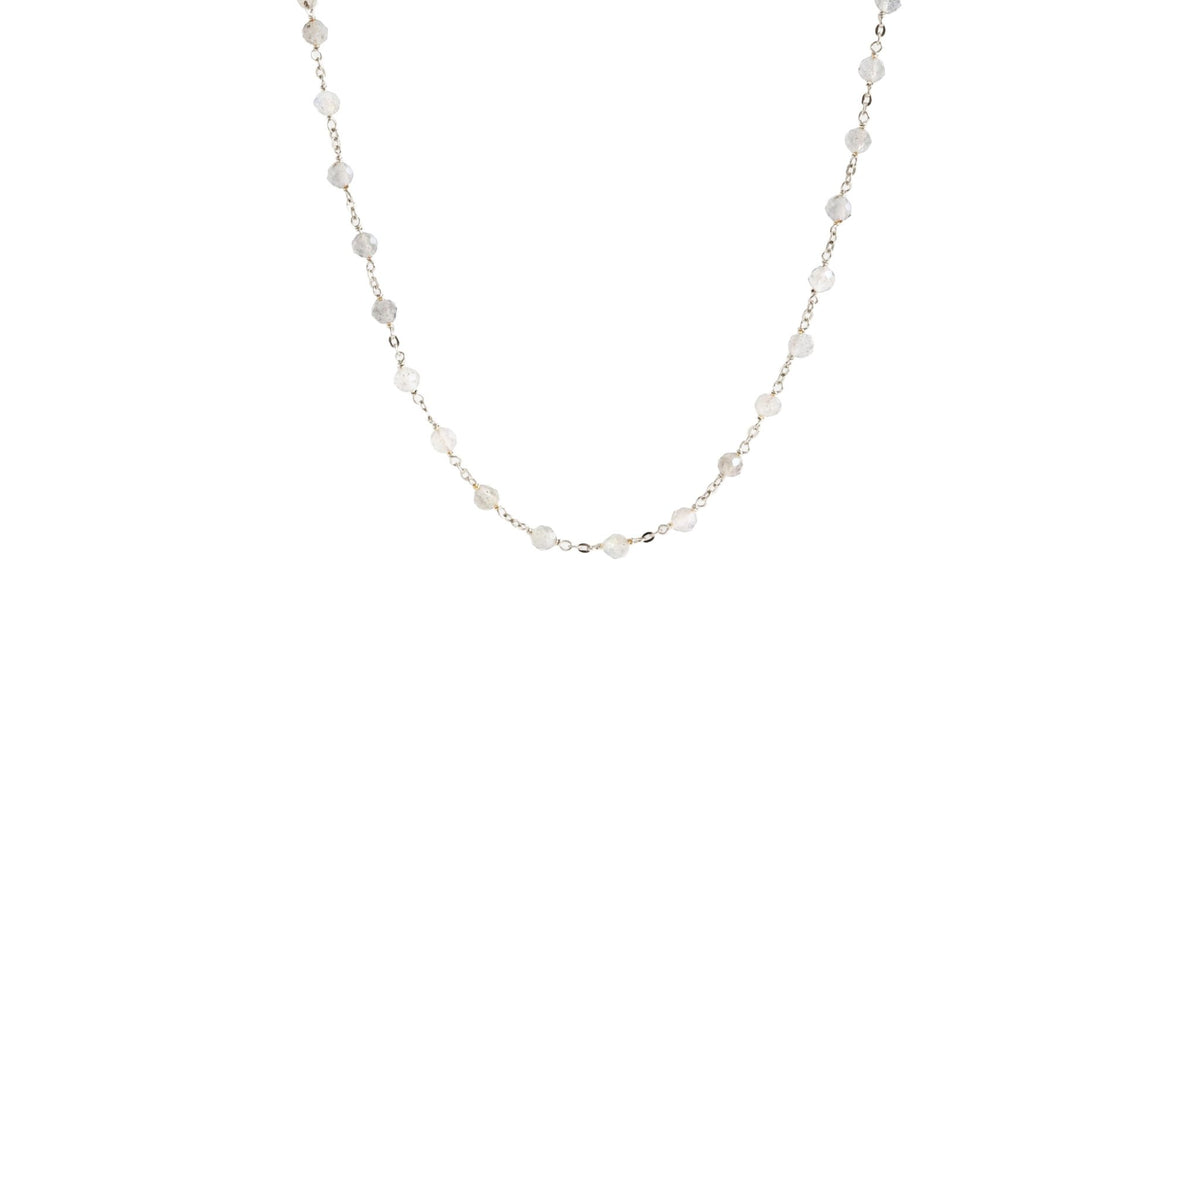 ICONIC SHORT BEADED NECKLACE - RAINBOW MOONSTONE &amp; SILVER 16-20&quot; - SO PRETTY CARA COTTER